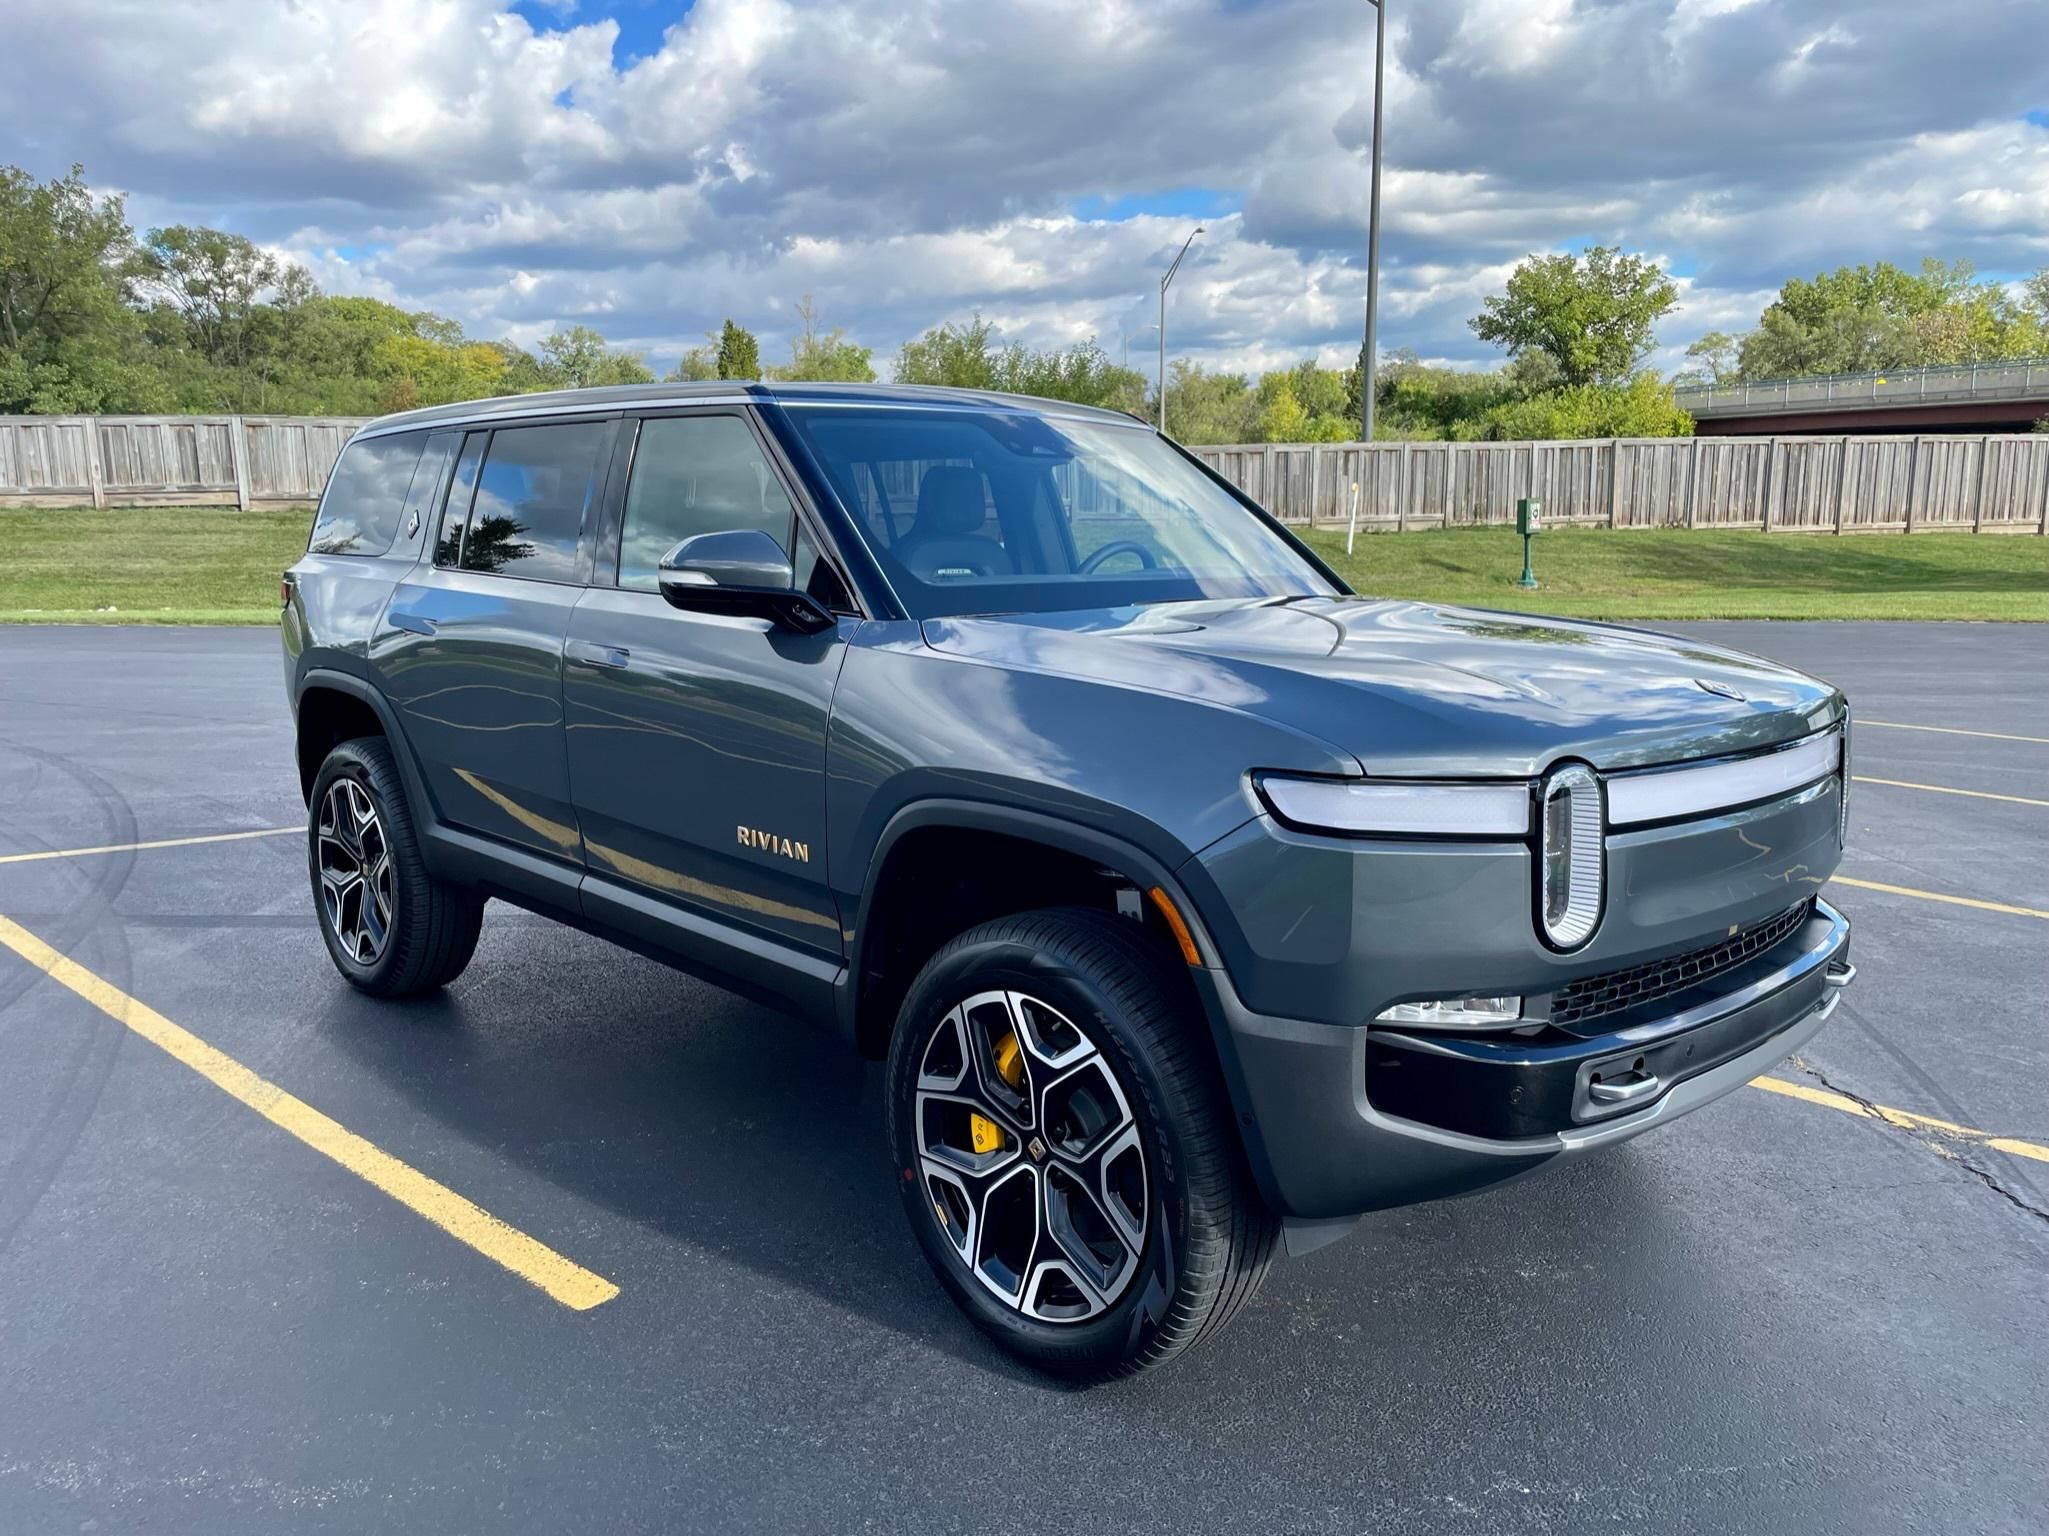 Experience the Exciting Electric | Rivian R1S SUV - Now Taking Reservations!